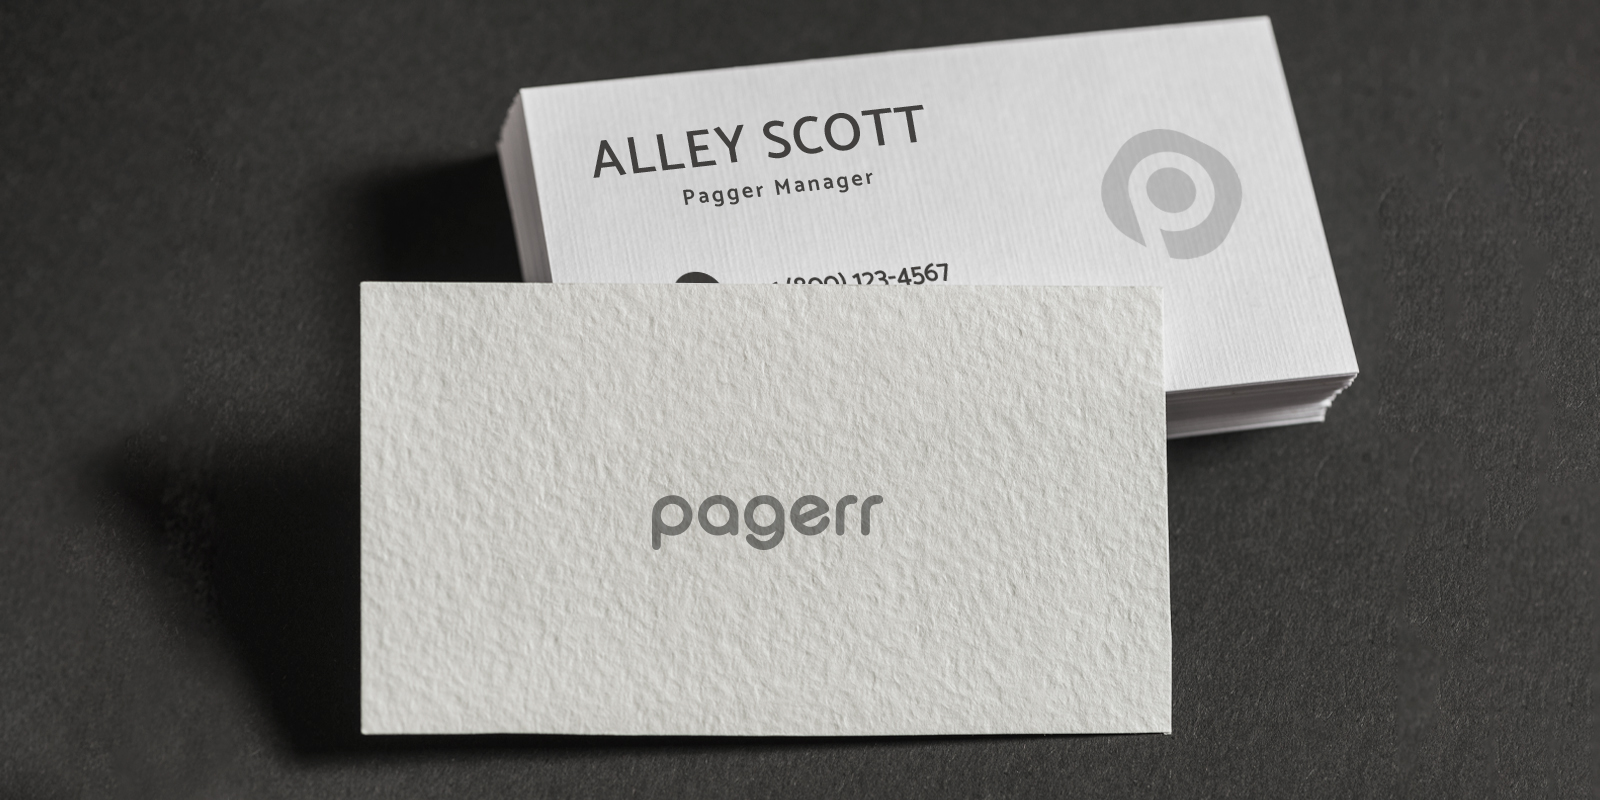 Special material business cards in Newcastle - Print with Pagerr